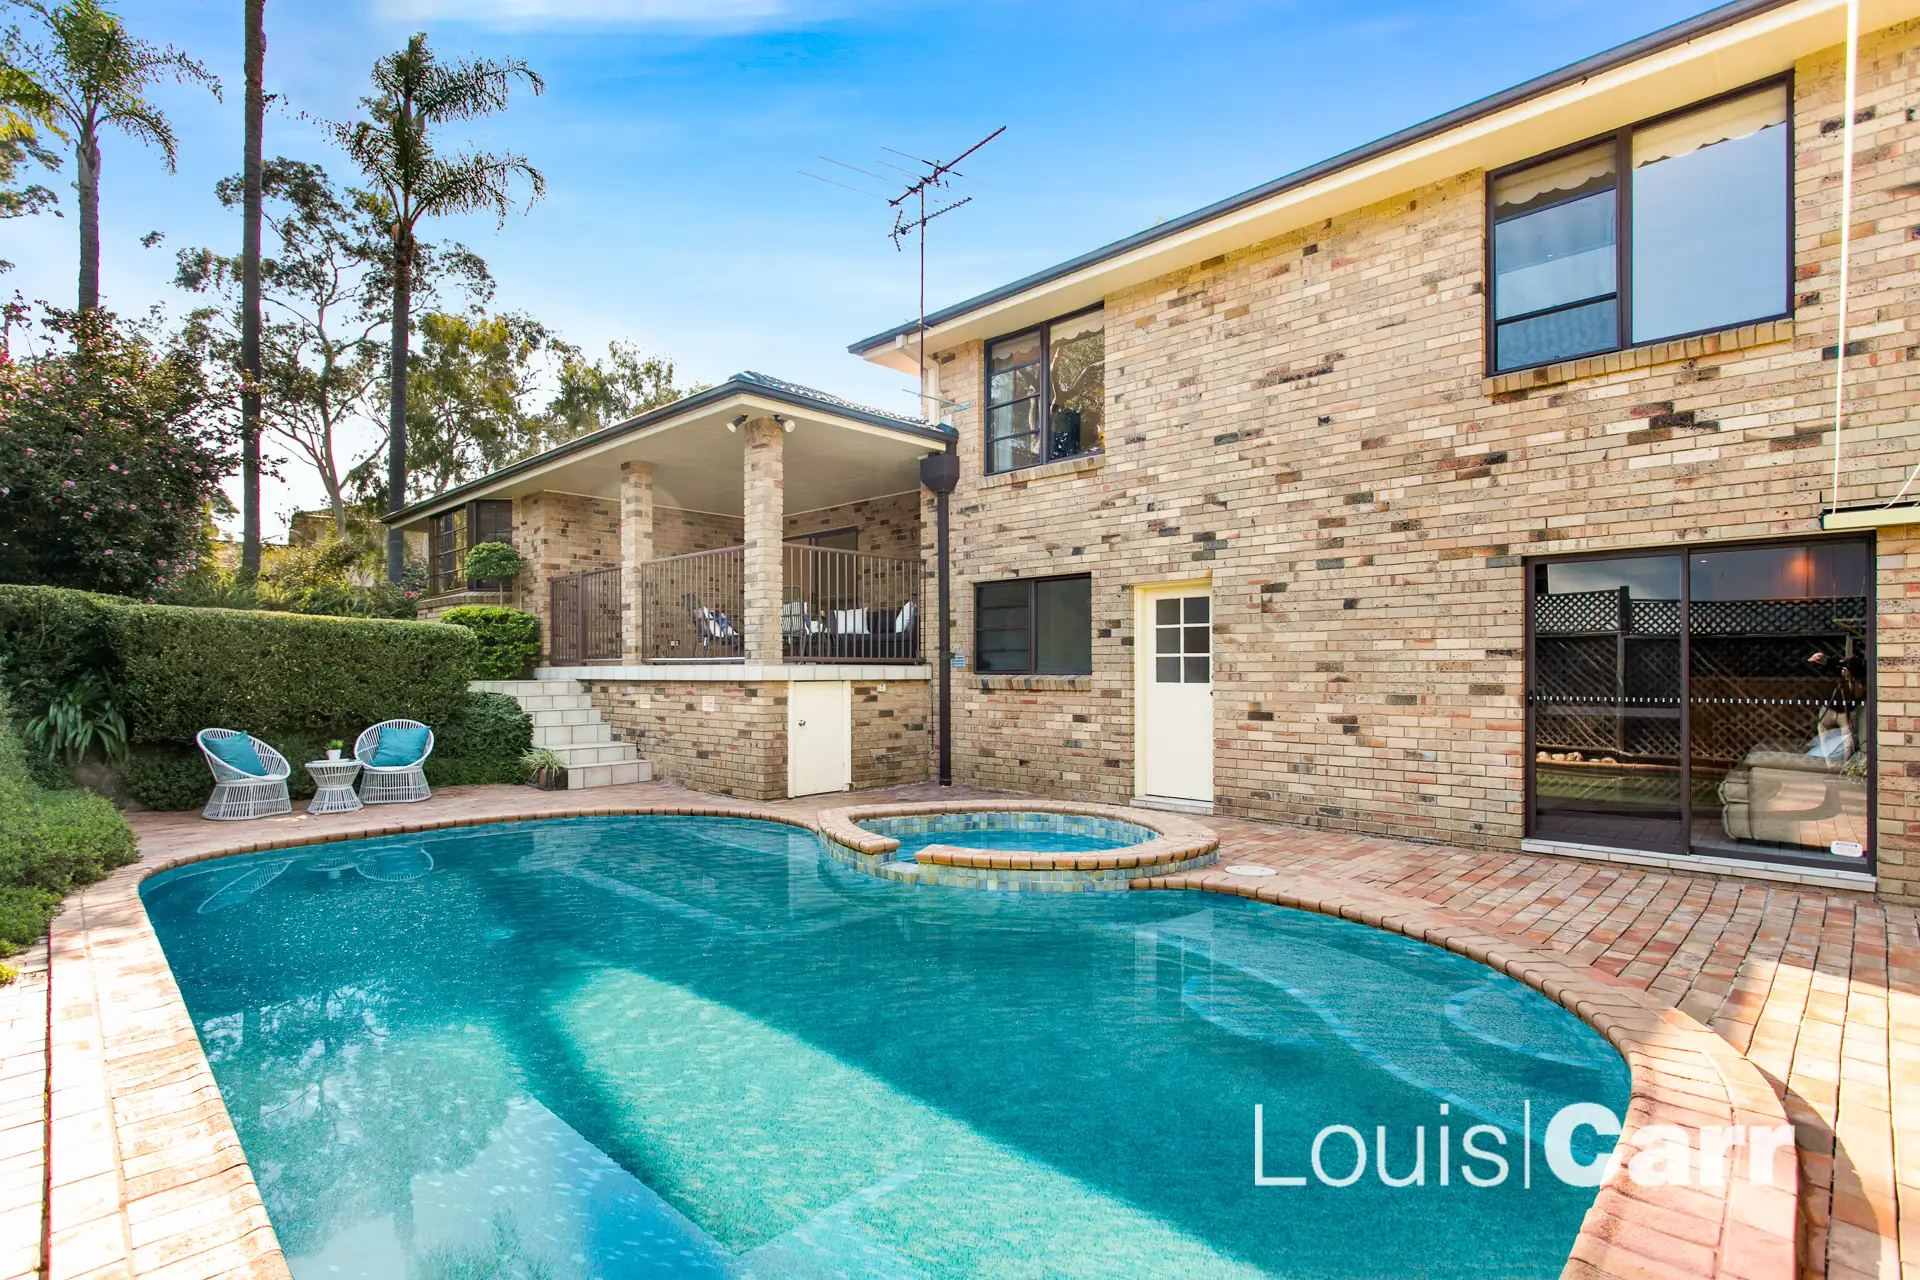 Photo #2: 33 Casuarina Drive, Cherrybrook - Sold by Louis Carr Real Estate